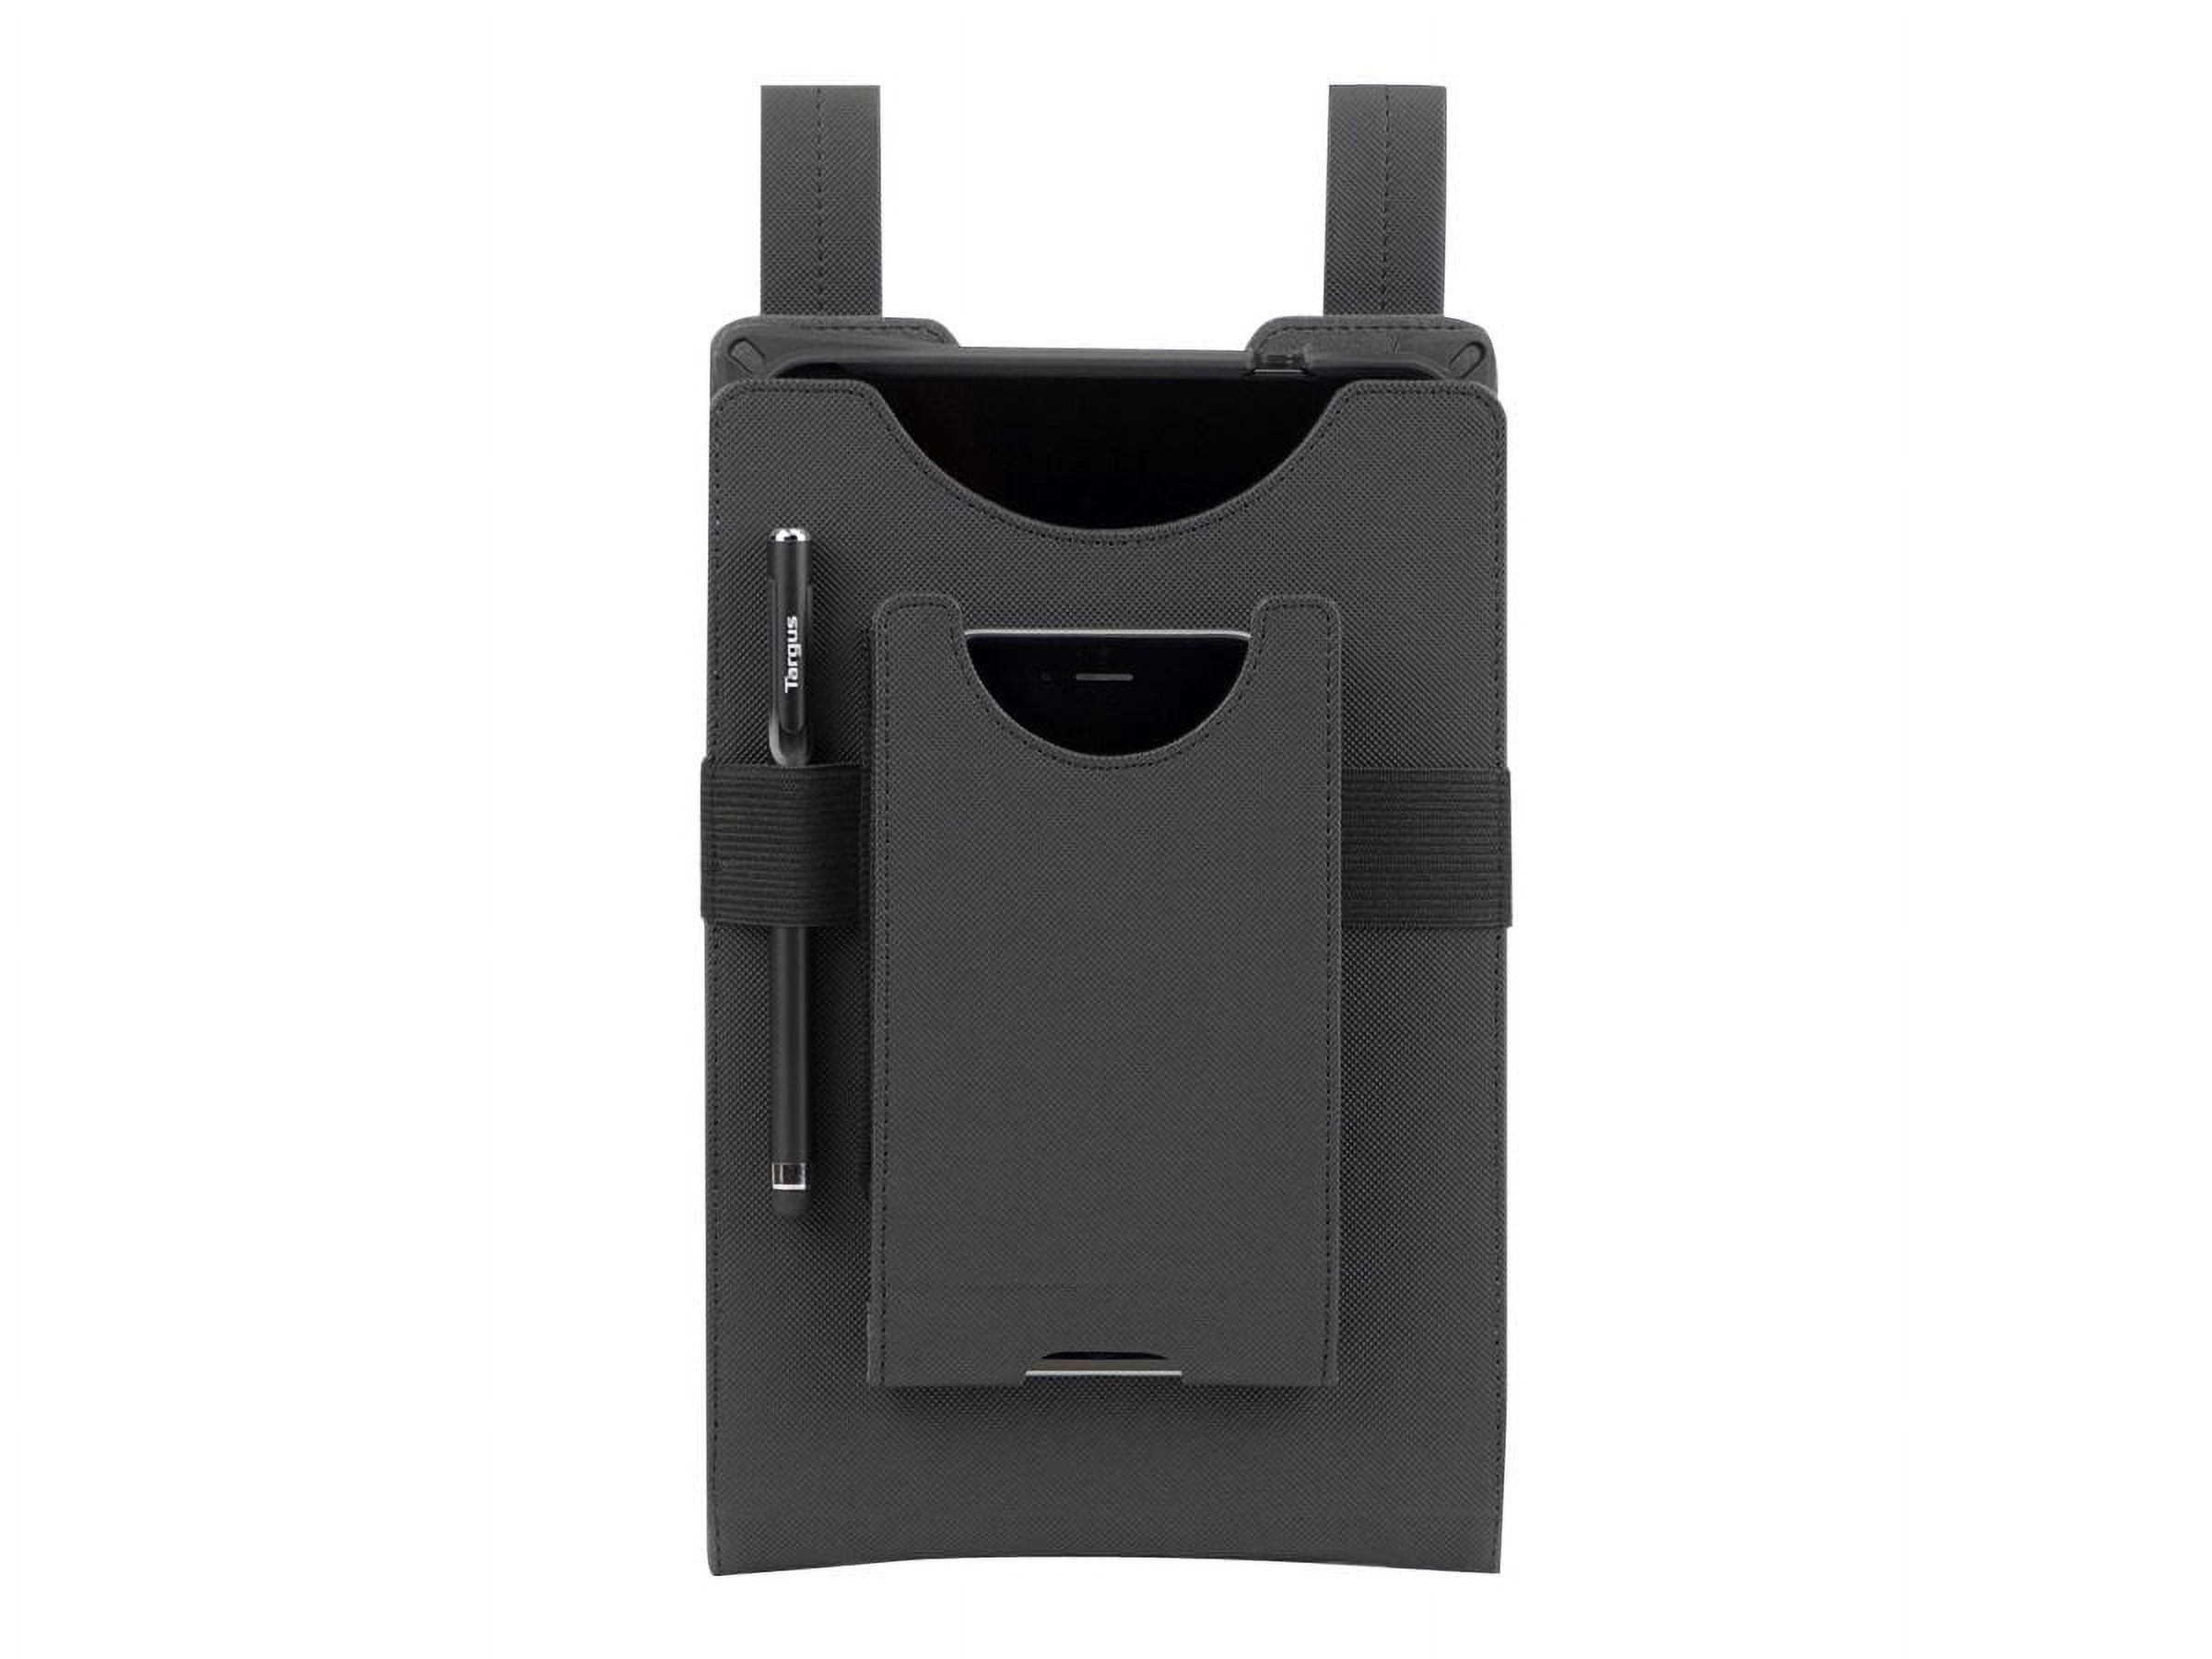 Targus THD474GLZ Carrying Case (Holster) for 8" Tablet, Black - image 3 of 11